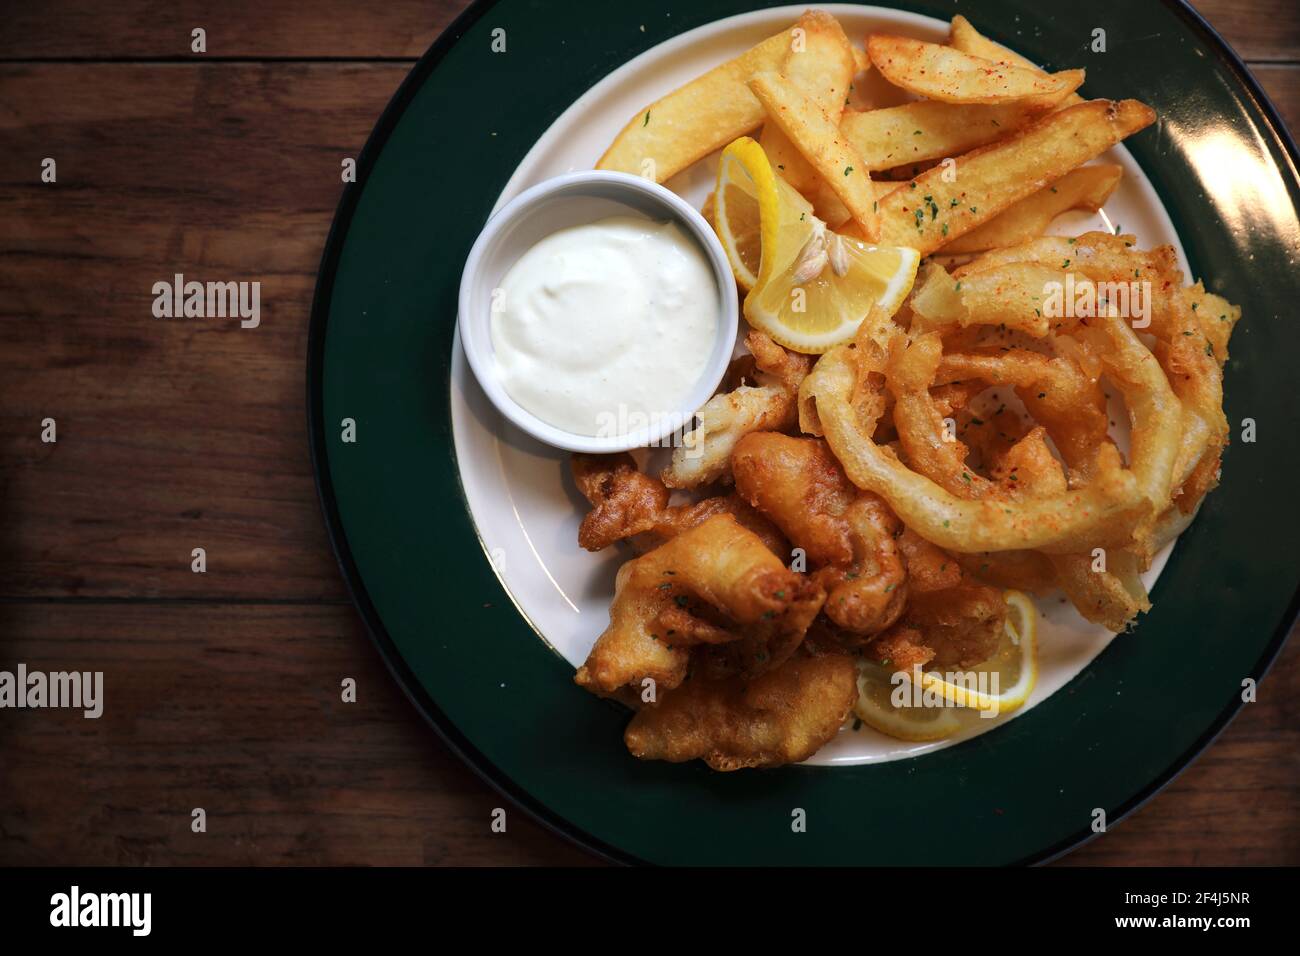 Fish and chips fried fish and potatoes on wood background vintage style Stock Photo